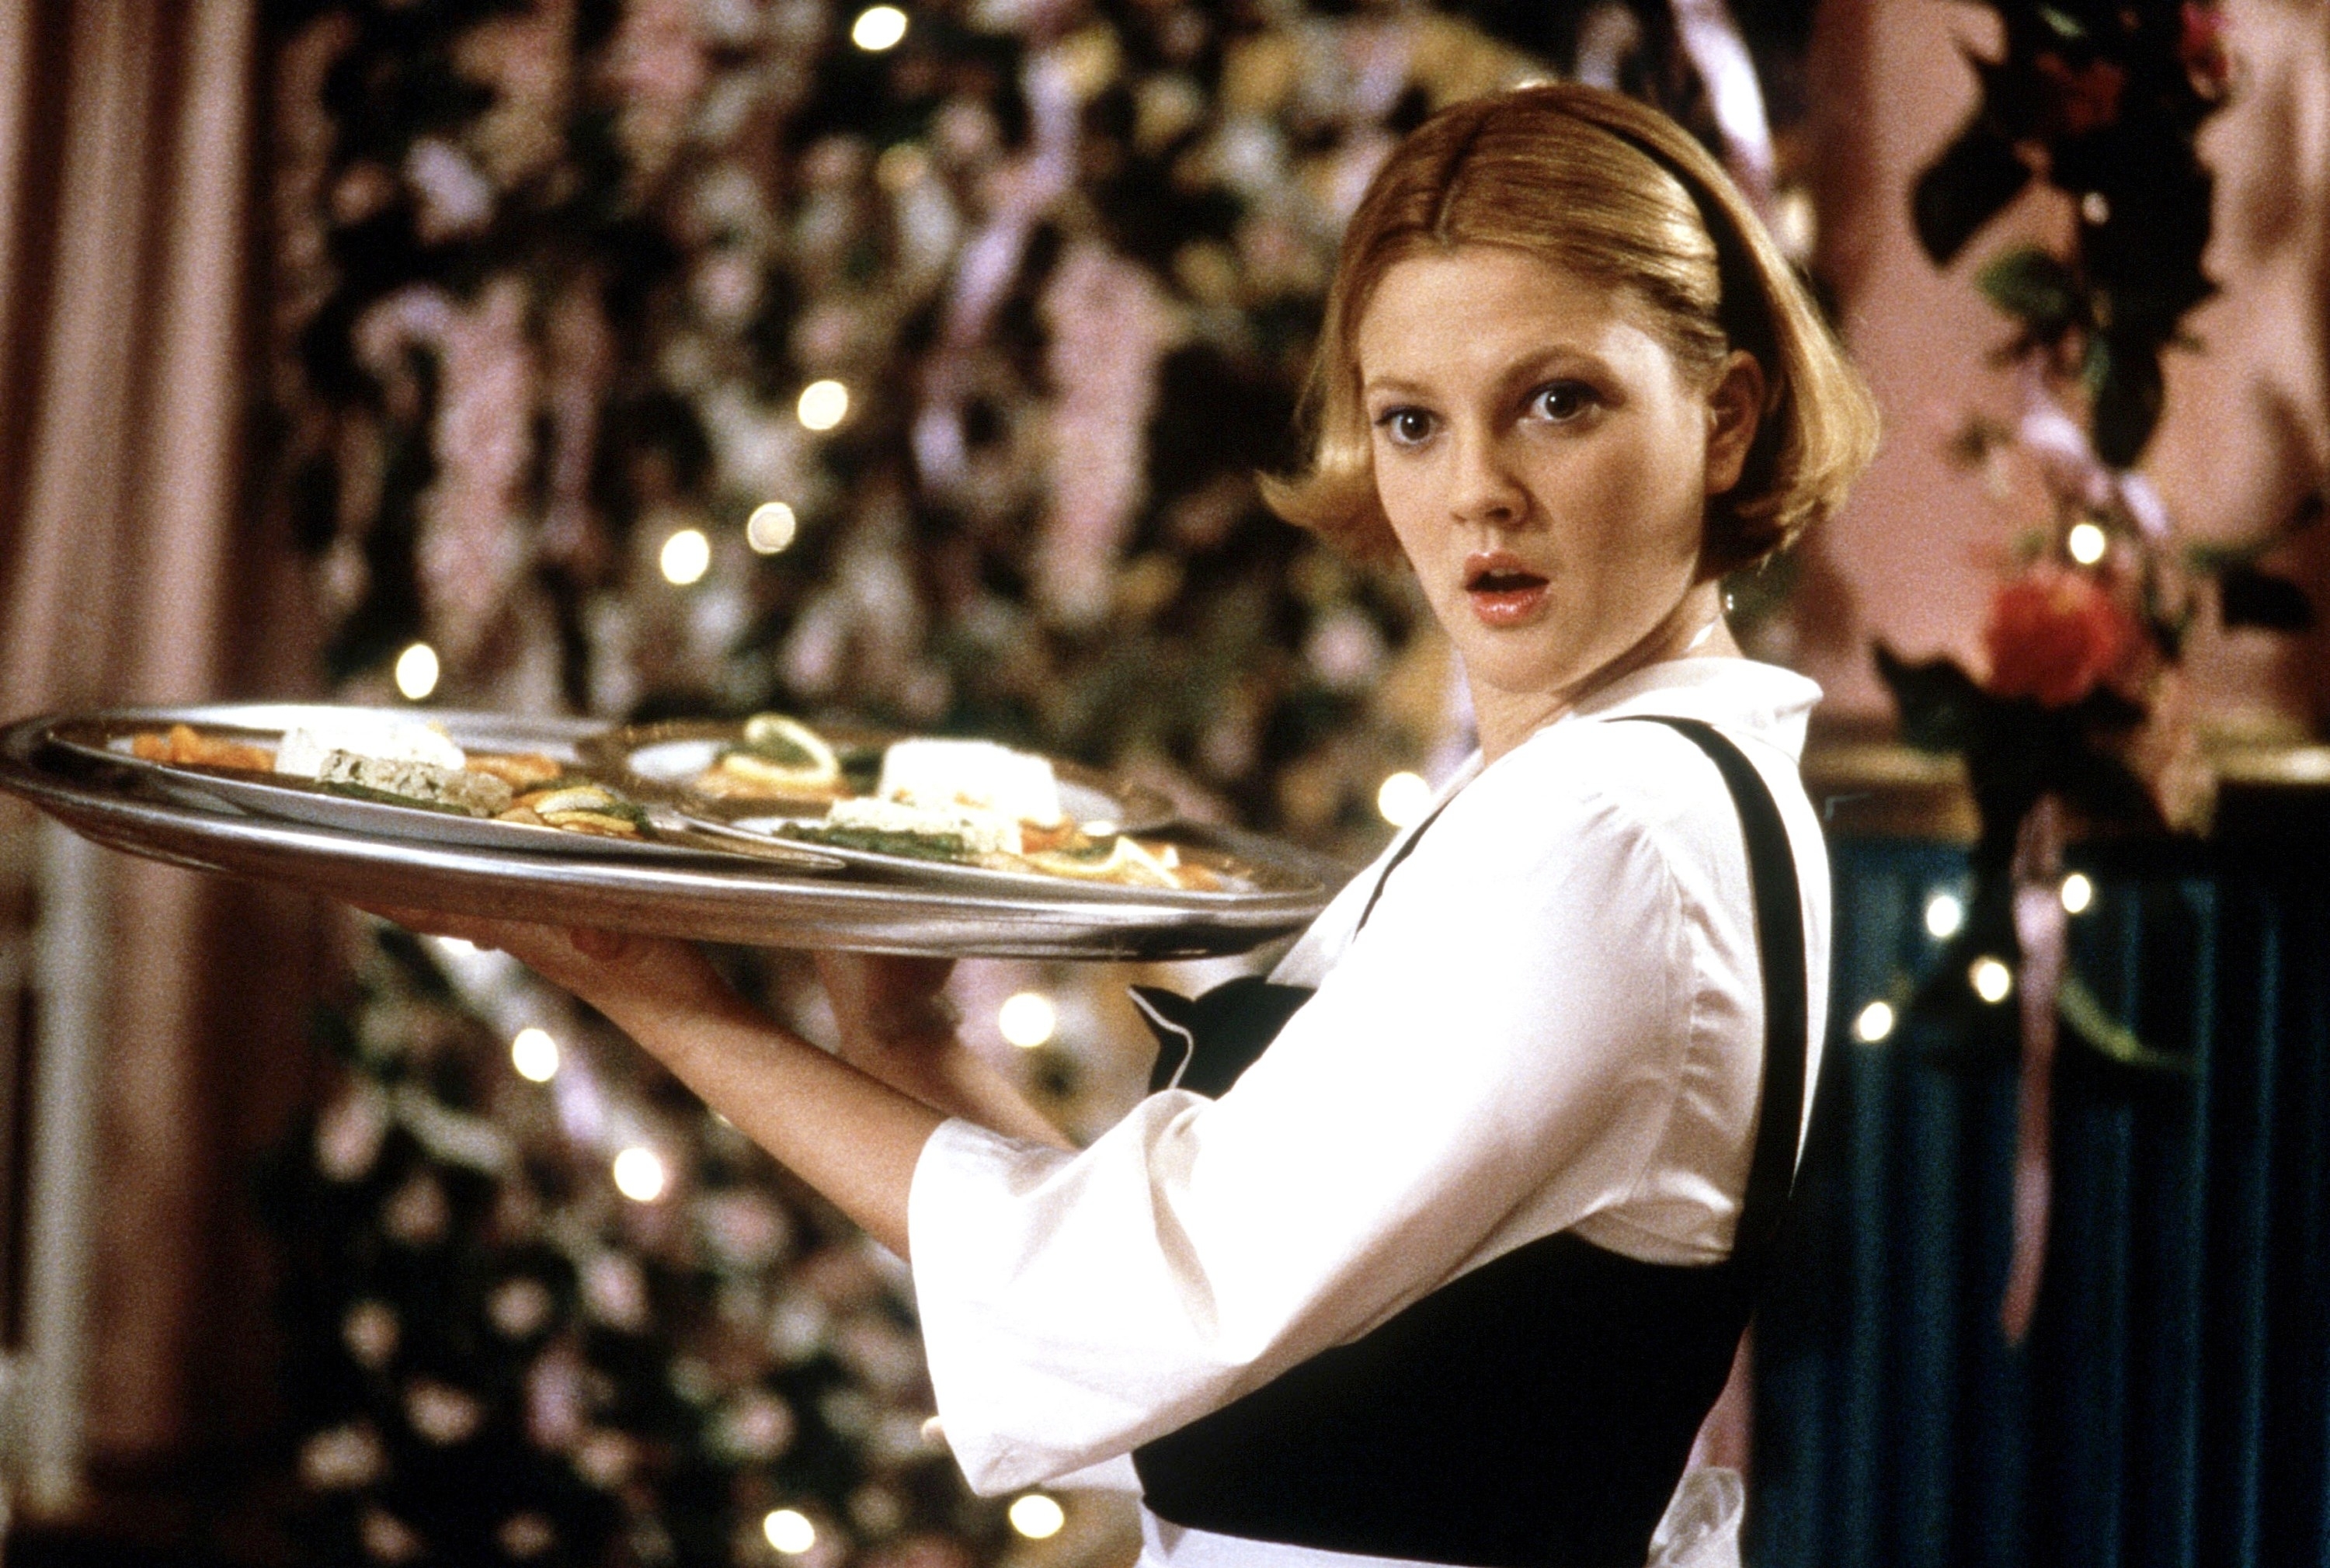 Drew Barrymore in a server uuniform holding a tray with food, standing in front of flowers and greenery